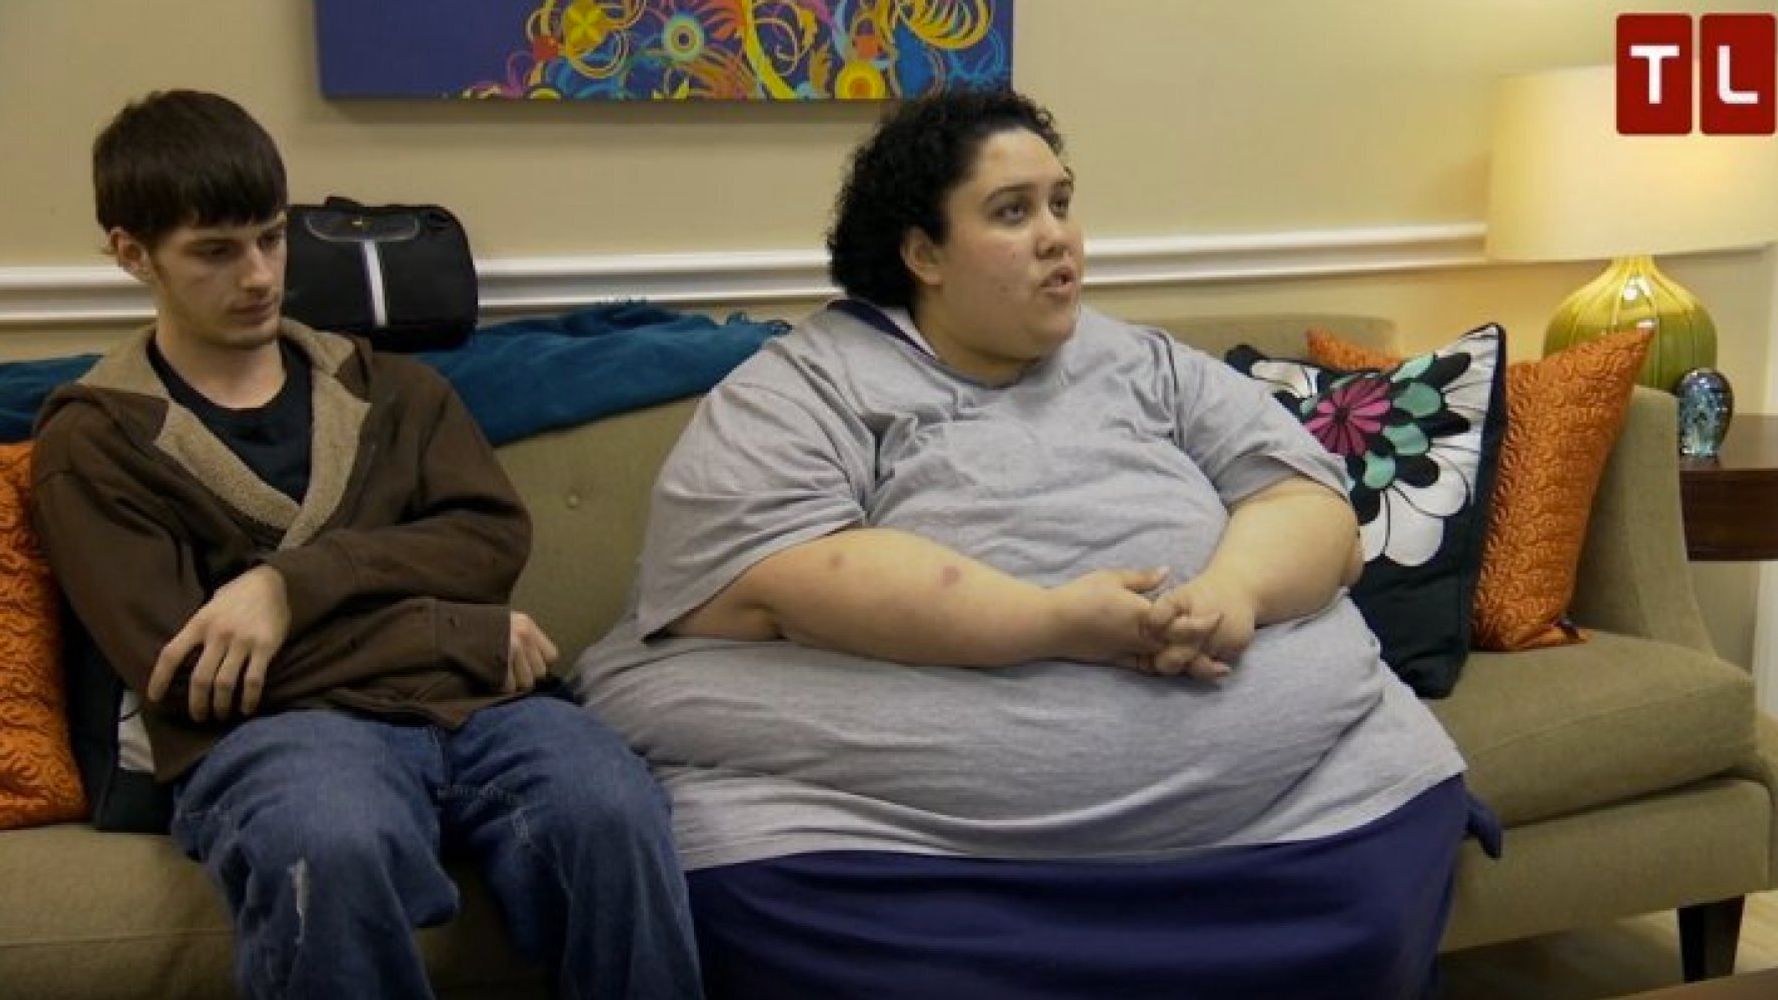 My 600lb Life': Bettie Jo Reveals How Her Husband Prevented Her From L...